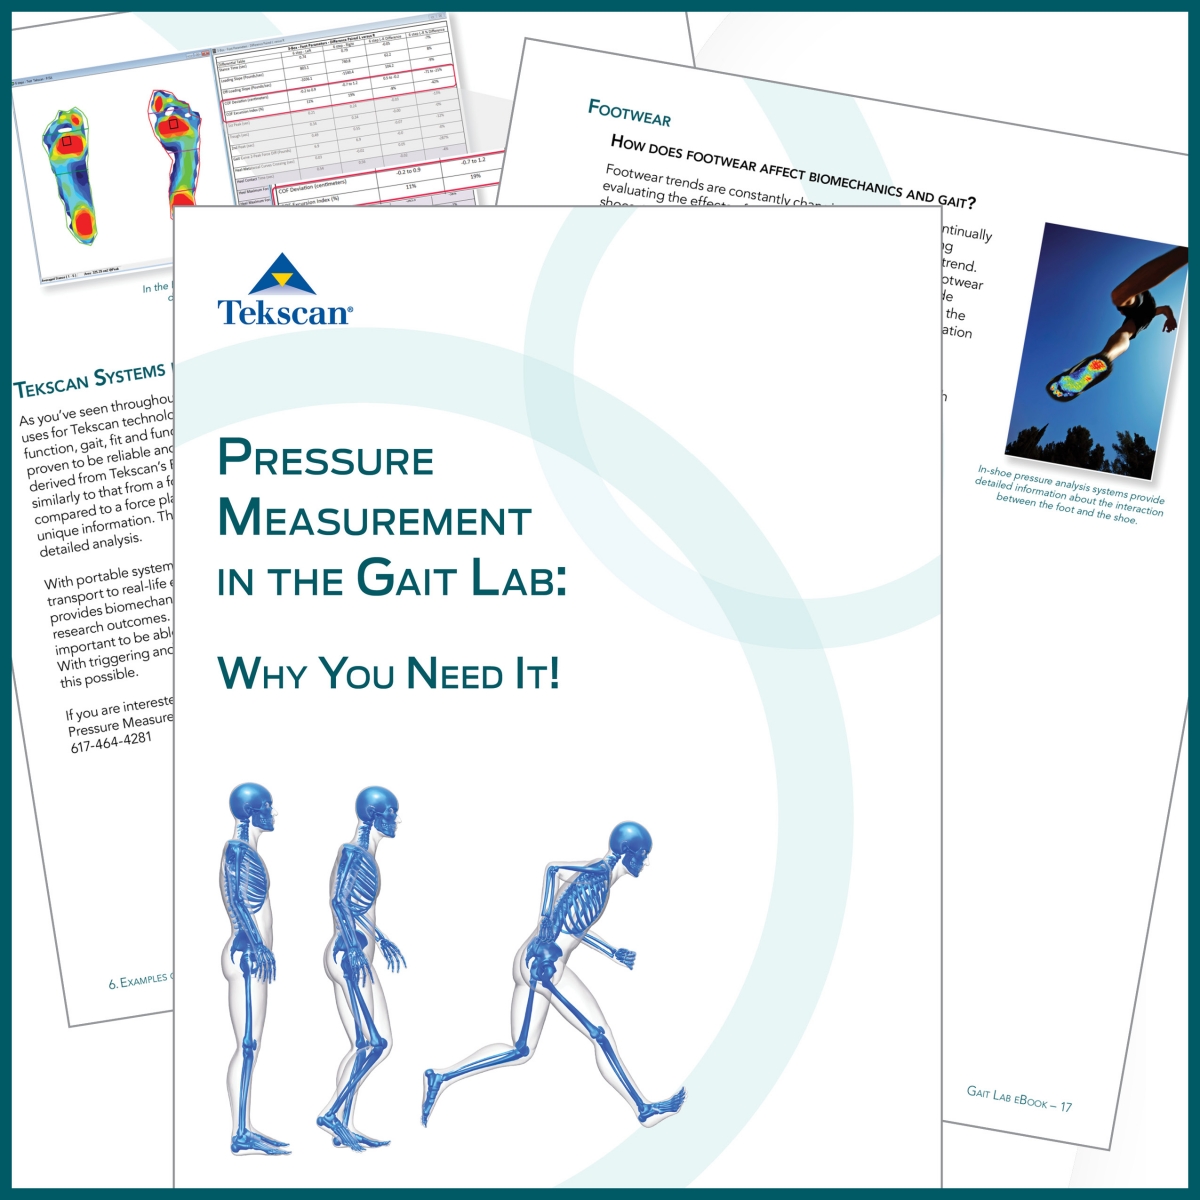 Download the eBook to learn how pressure measurement can complement and synchronize with the existing technology in your gait lab.